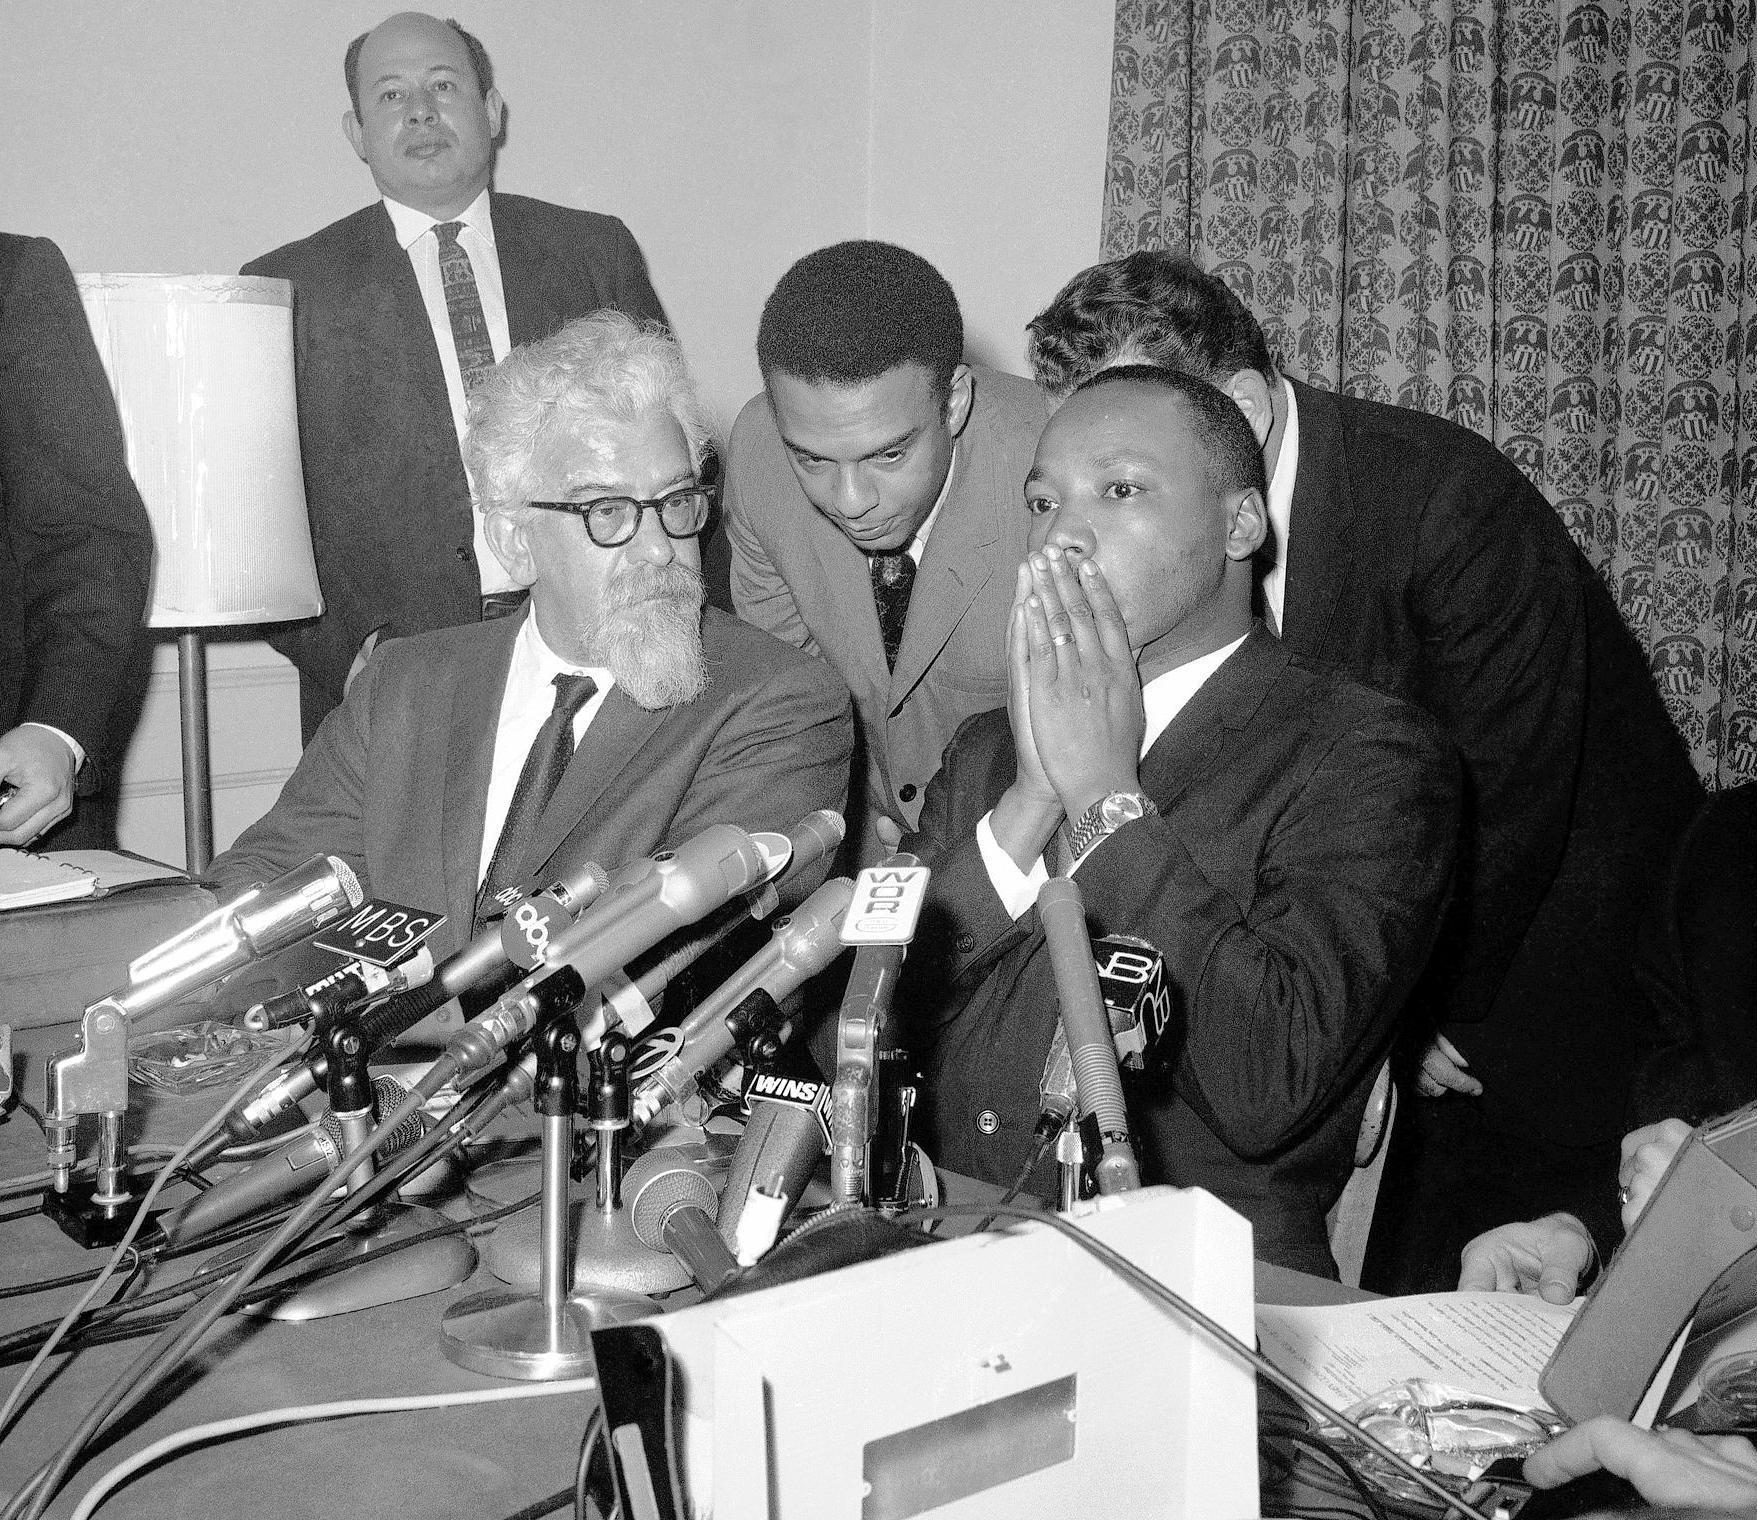 A discussion on martin luther king jrs opposition to the vietnam war